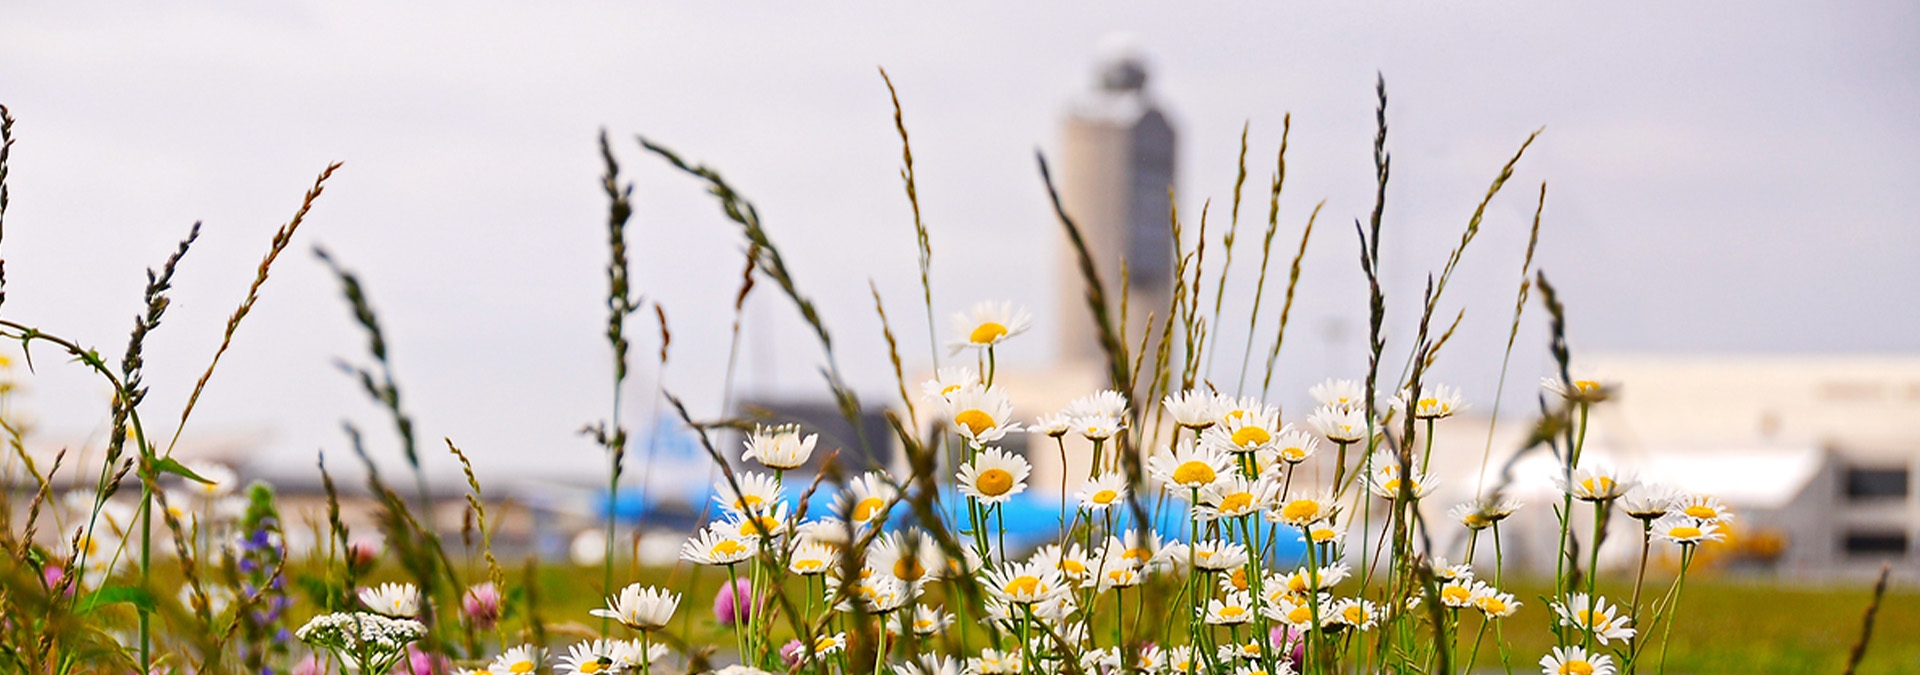 Grass and flowers in front of Logan Airport Tower